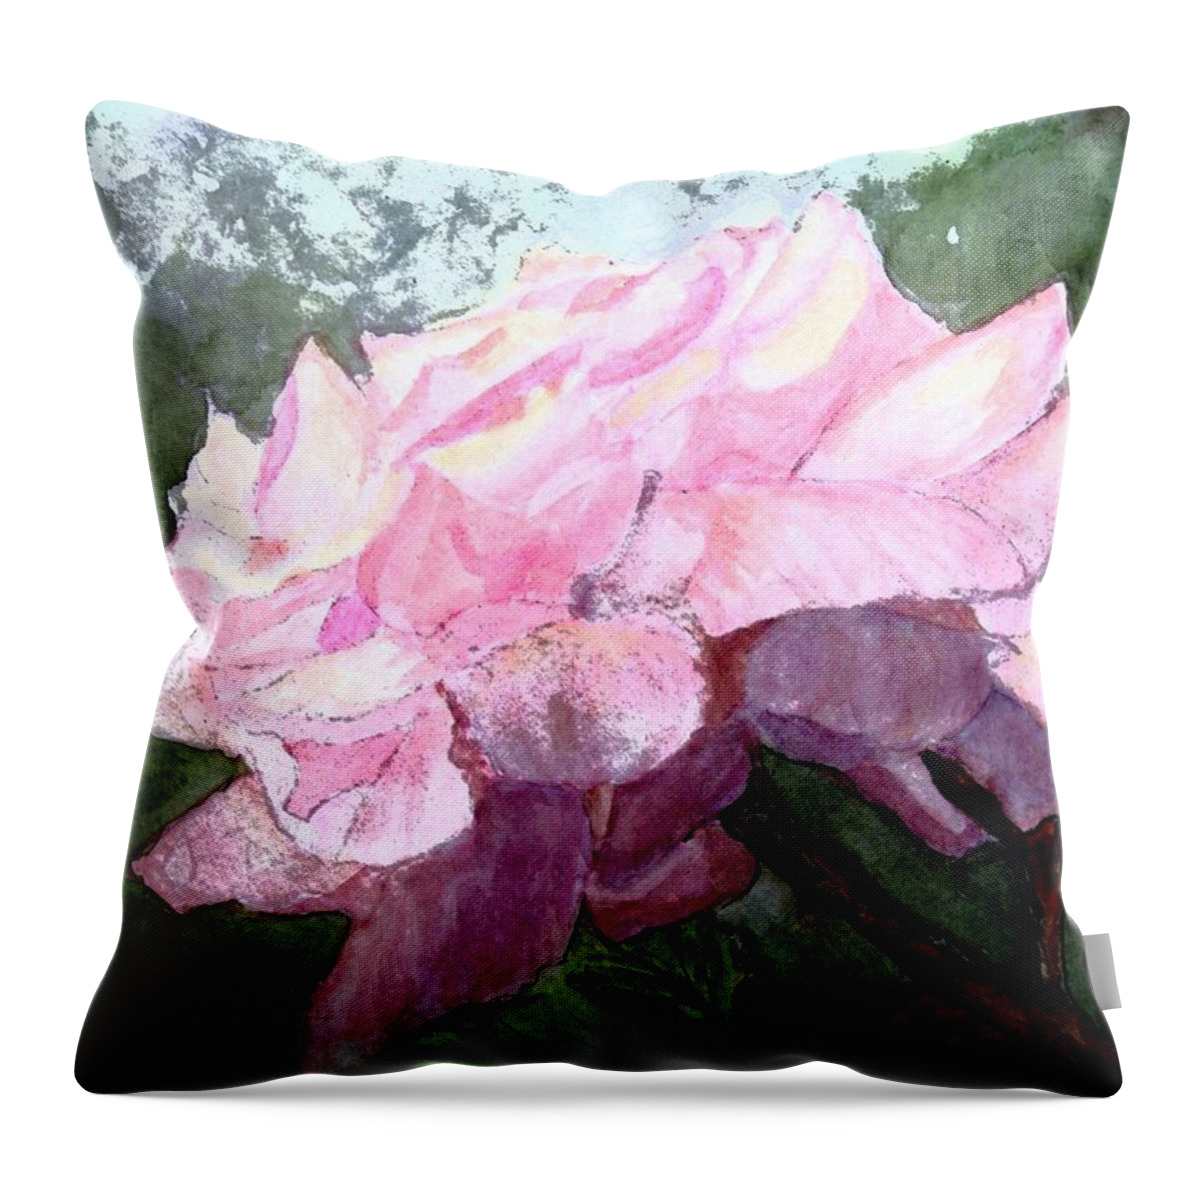 Rose Throw Pillow featuring the painting Pretty Pink Rose by Carol Grimes